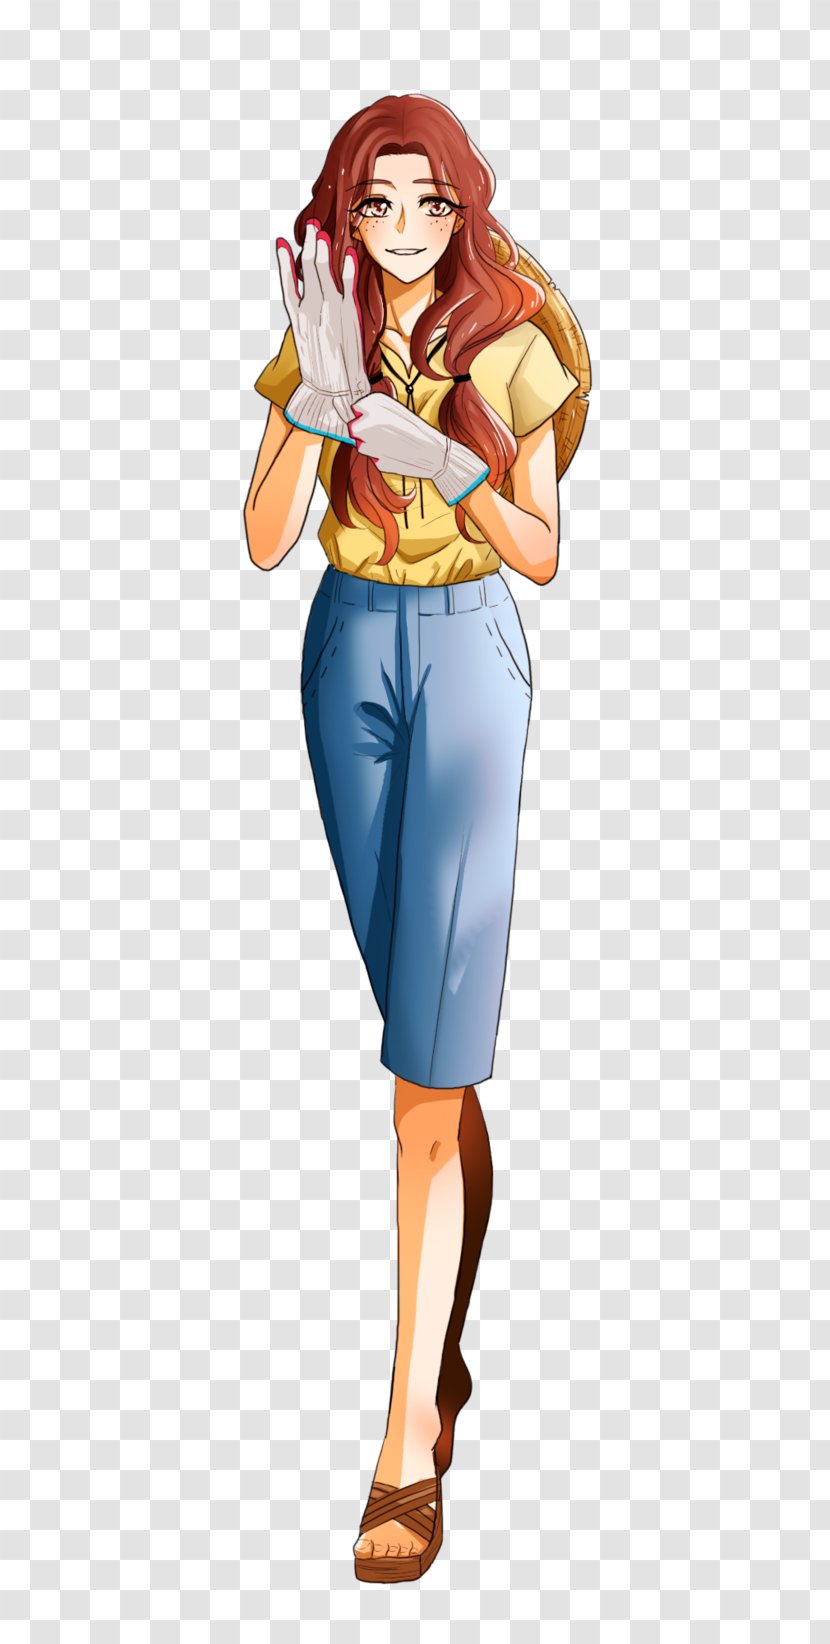 Illustration Costume Pin-up Girl Fashion Model - Fictional Character - Tierno De Oveja Transparent PNG